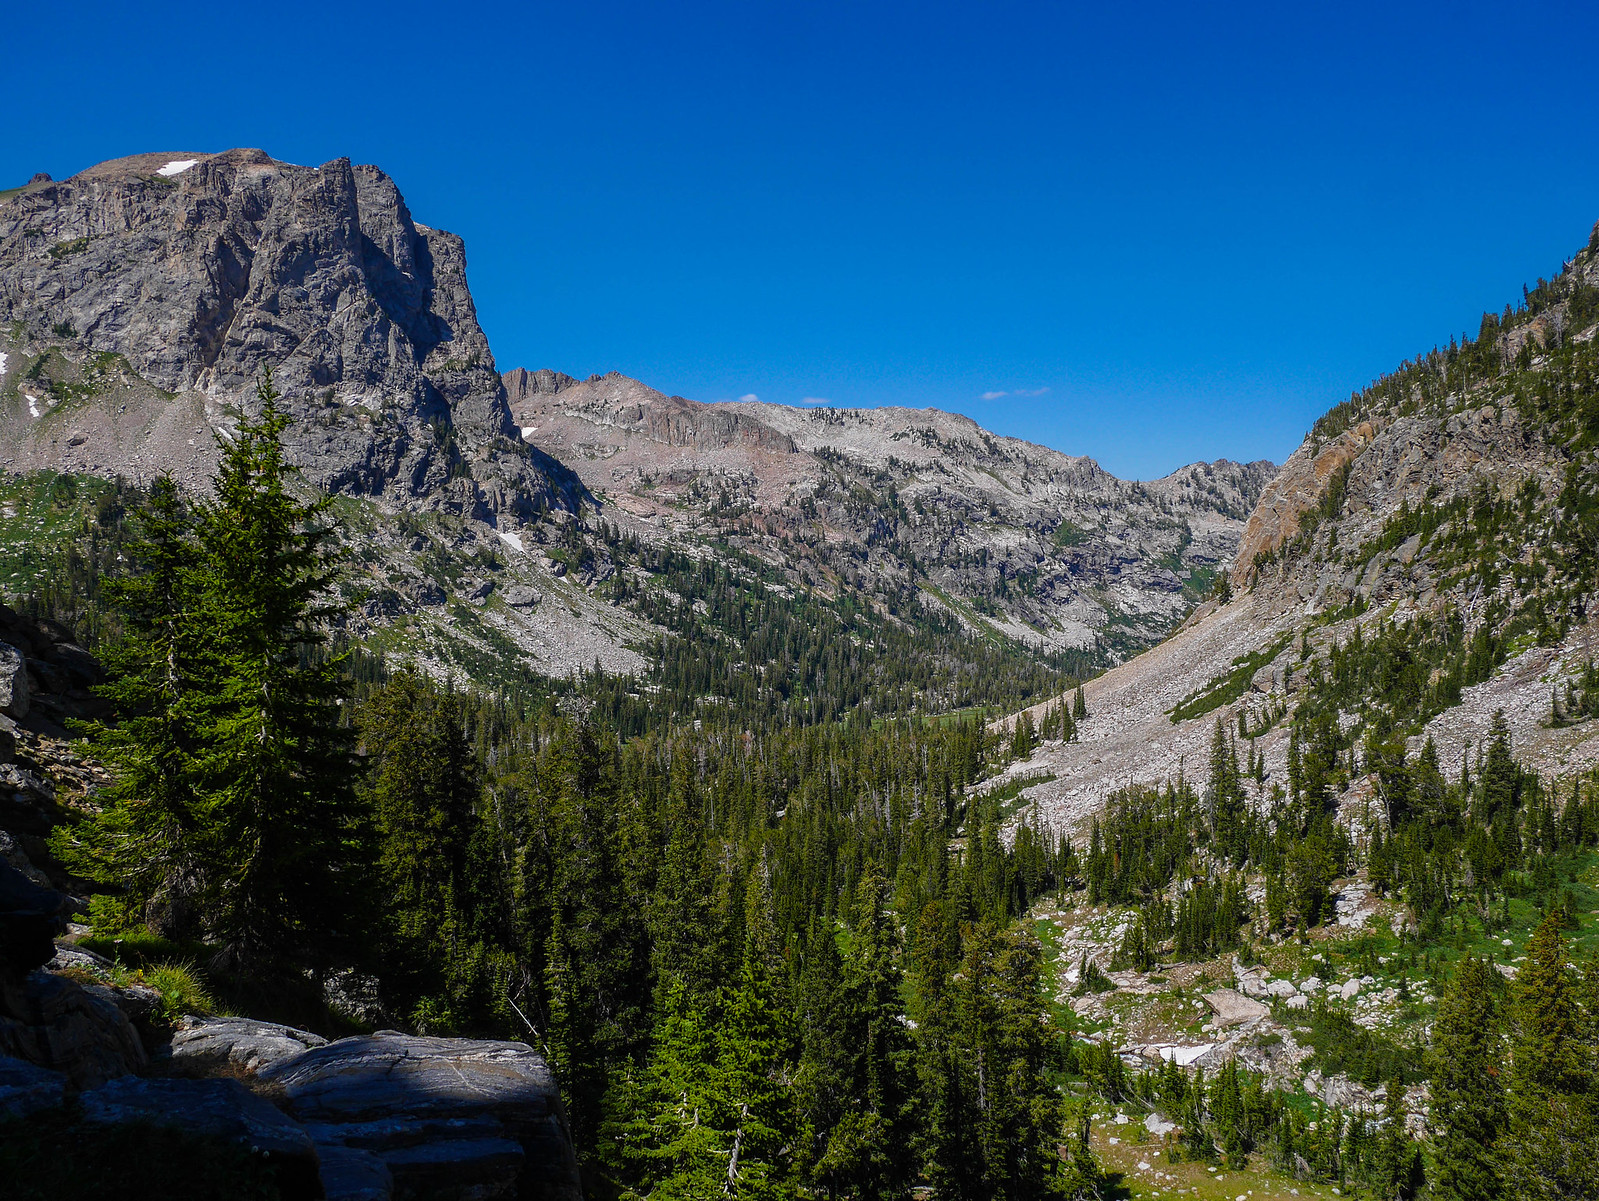 View down the main part of Cascade Canyon